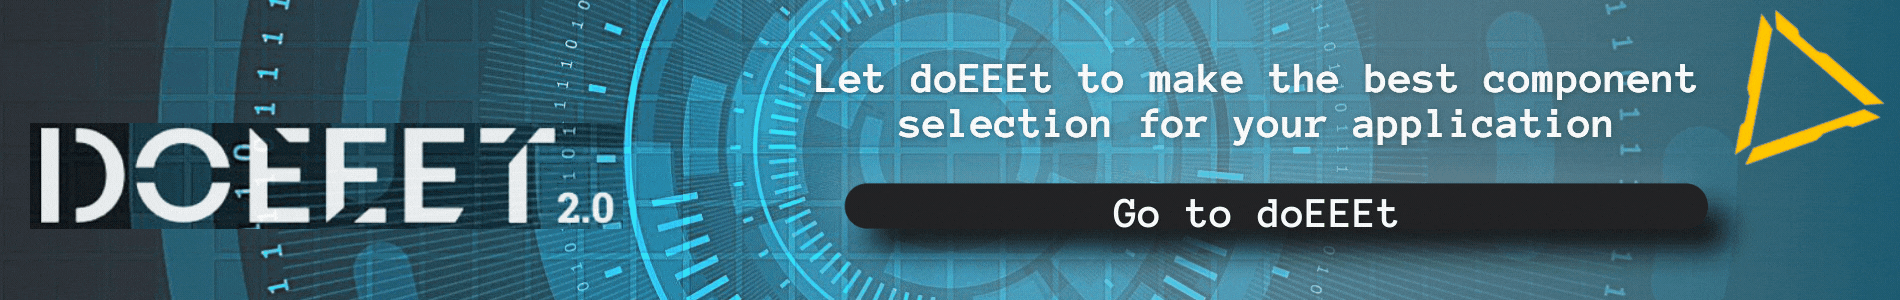 Let doEEEt to make the best component selection for your application